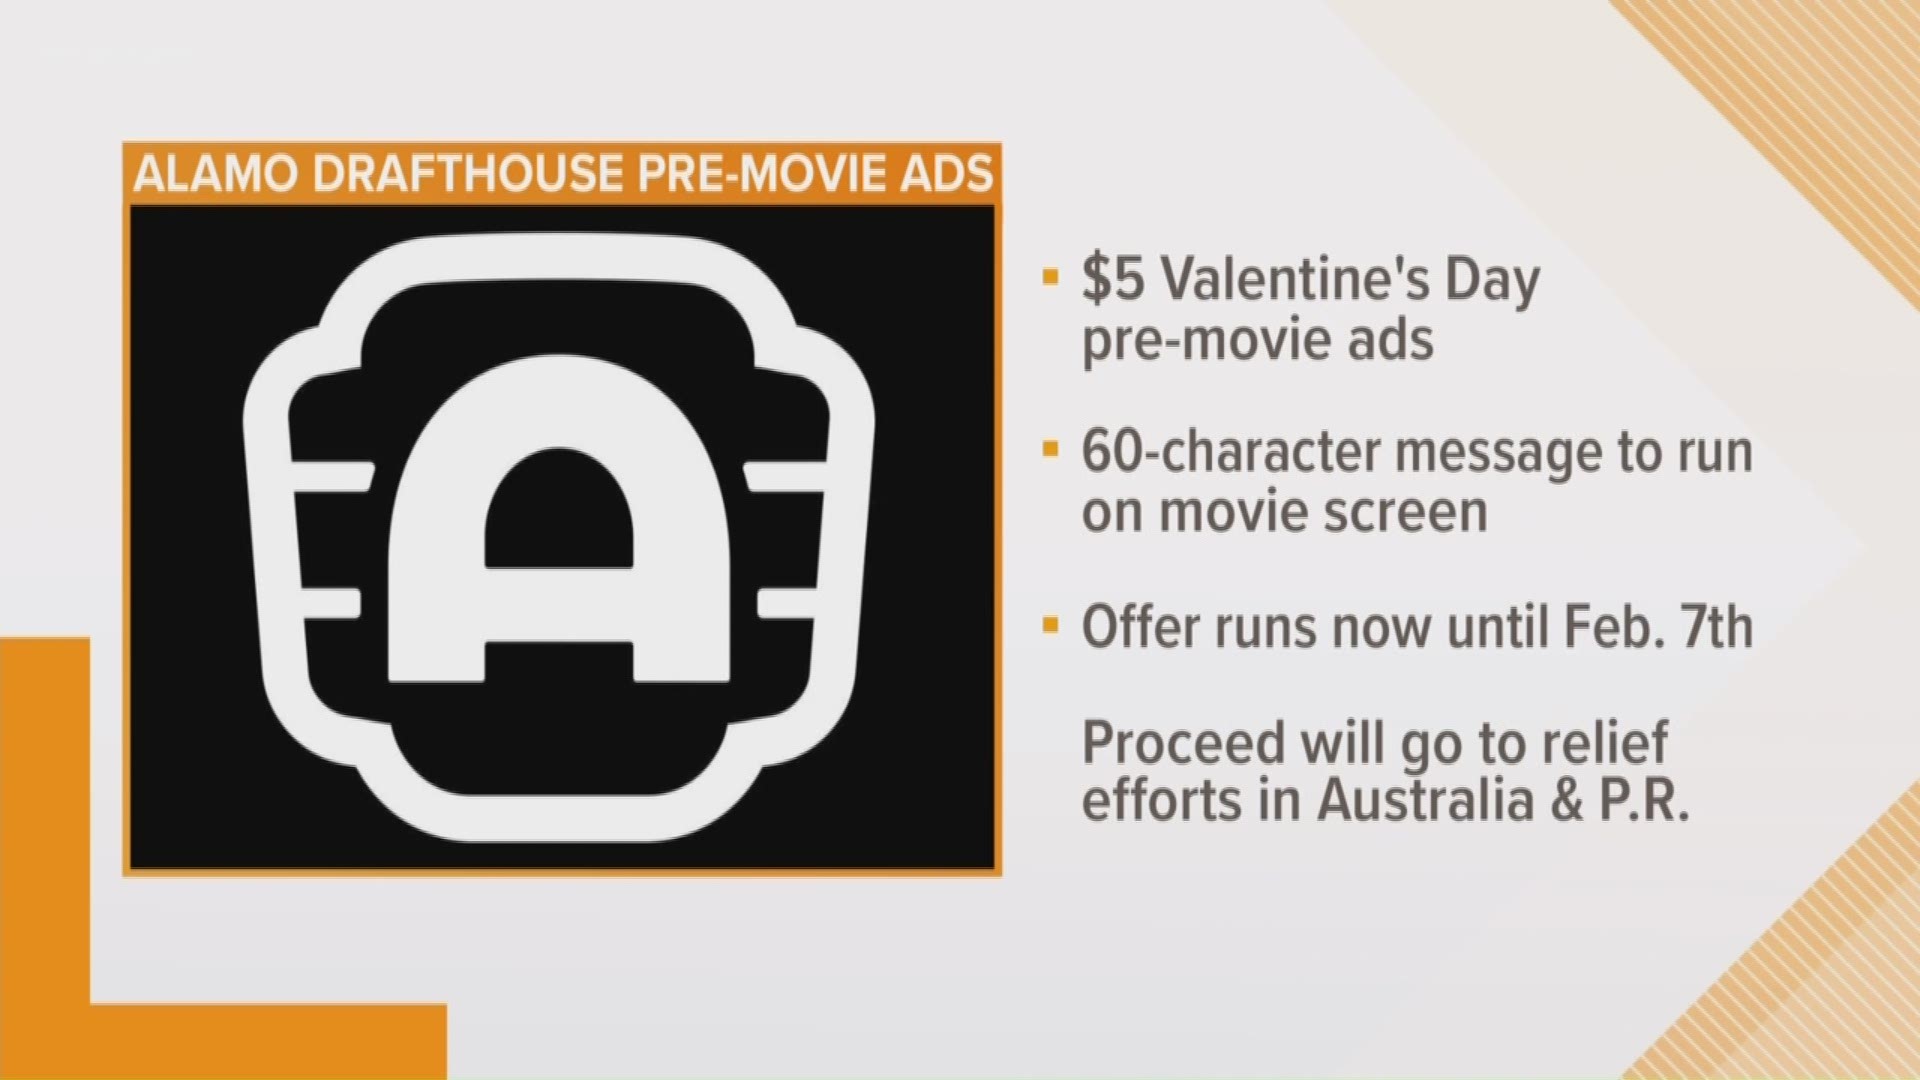 People can submit a message to their significant other and it will run on the big screen on Valentine's Day before the film starts.